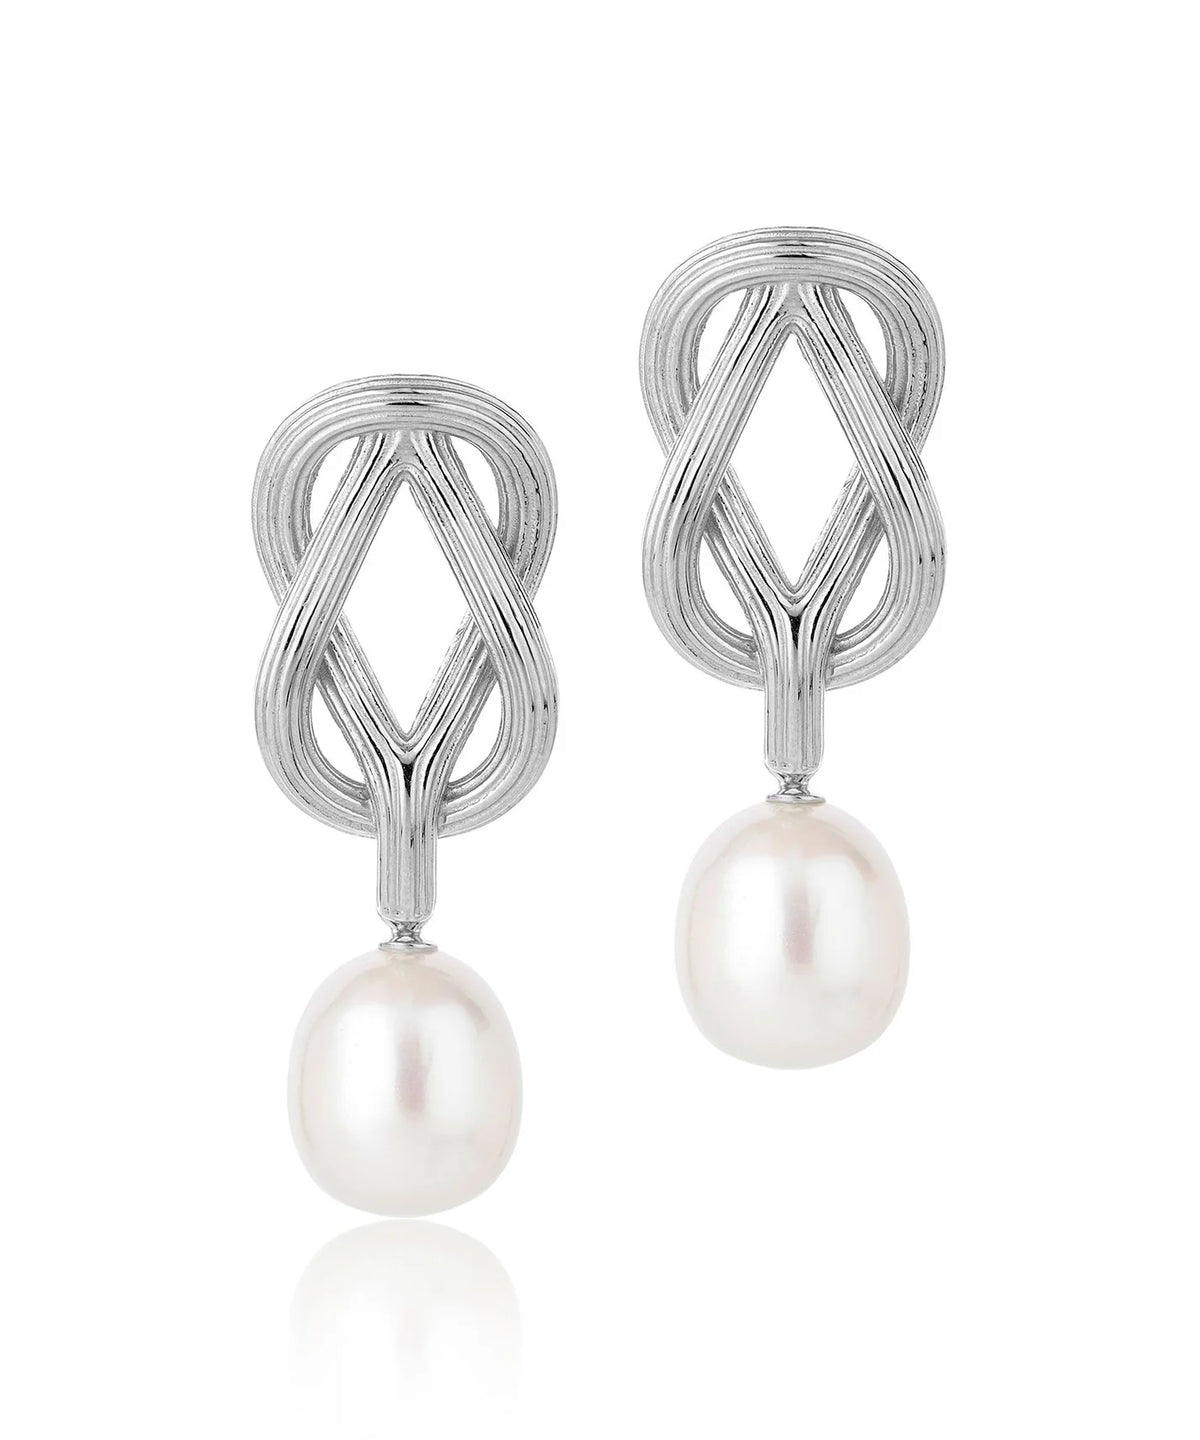 Twisted knot sterling silver stud earrings with single pearl drop